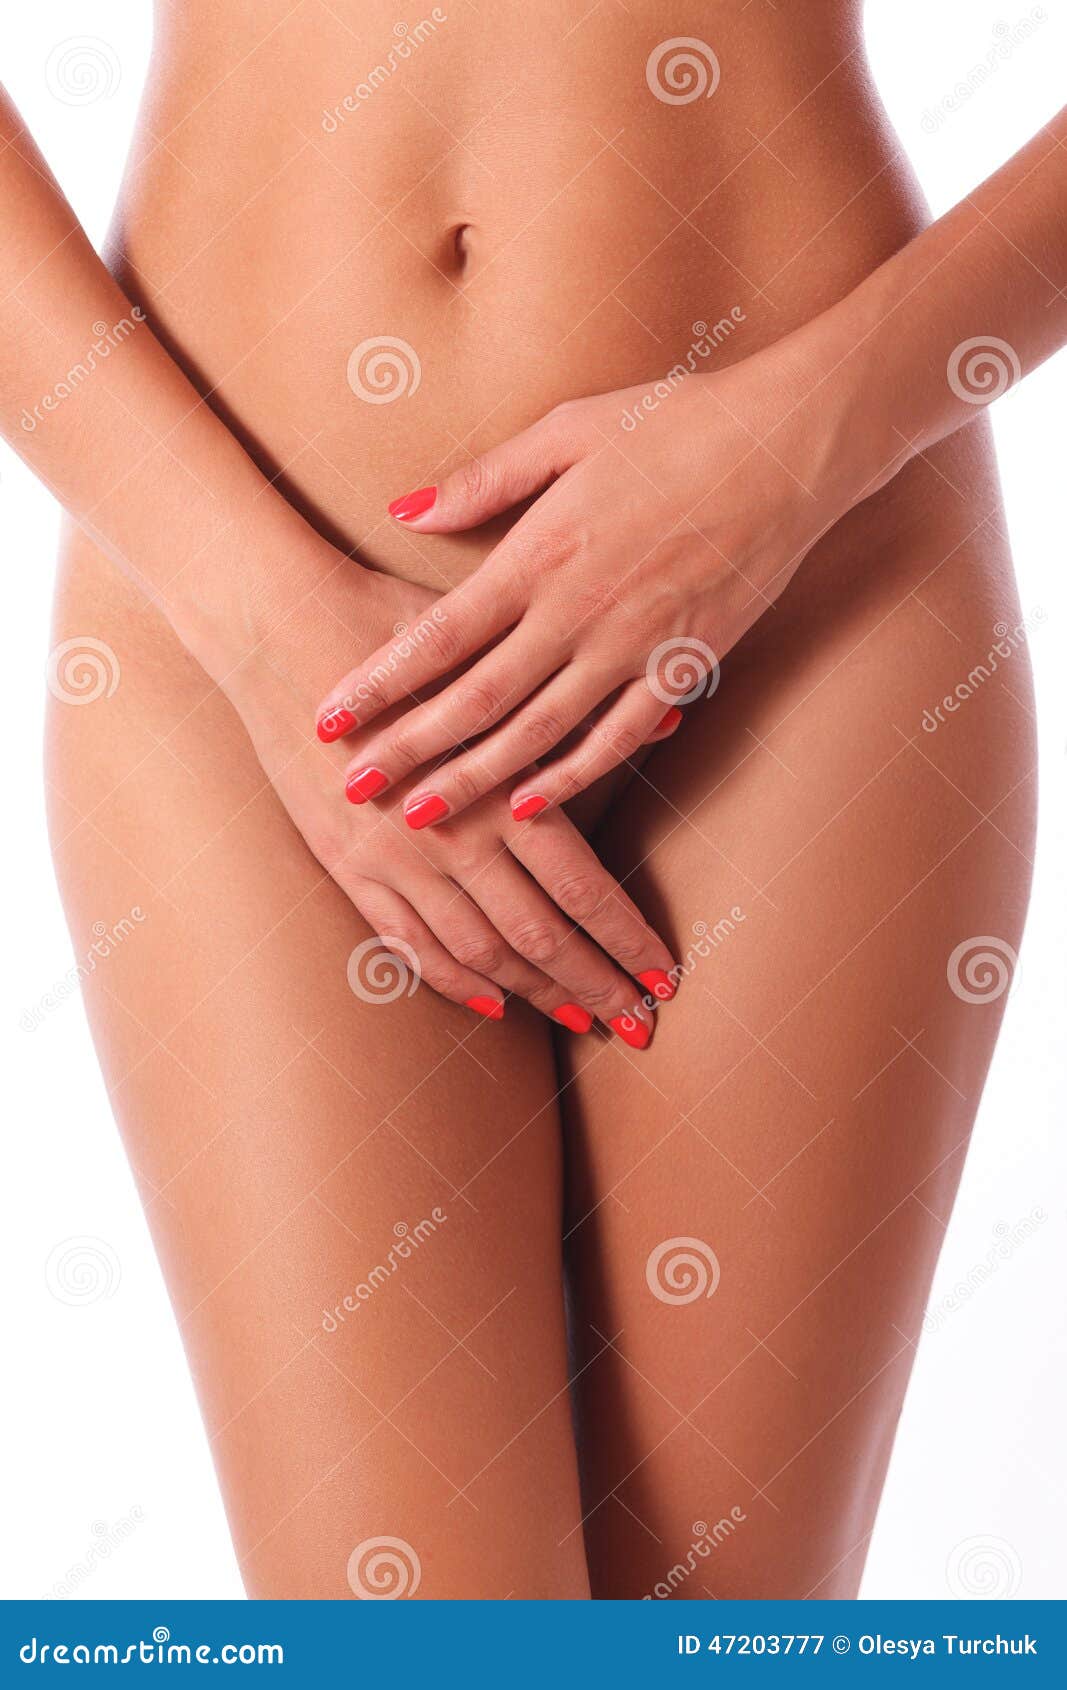 Sensual Image of Female Nude Thighs with Hands Covering Privates Stock Image